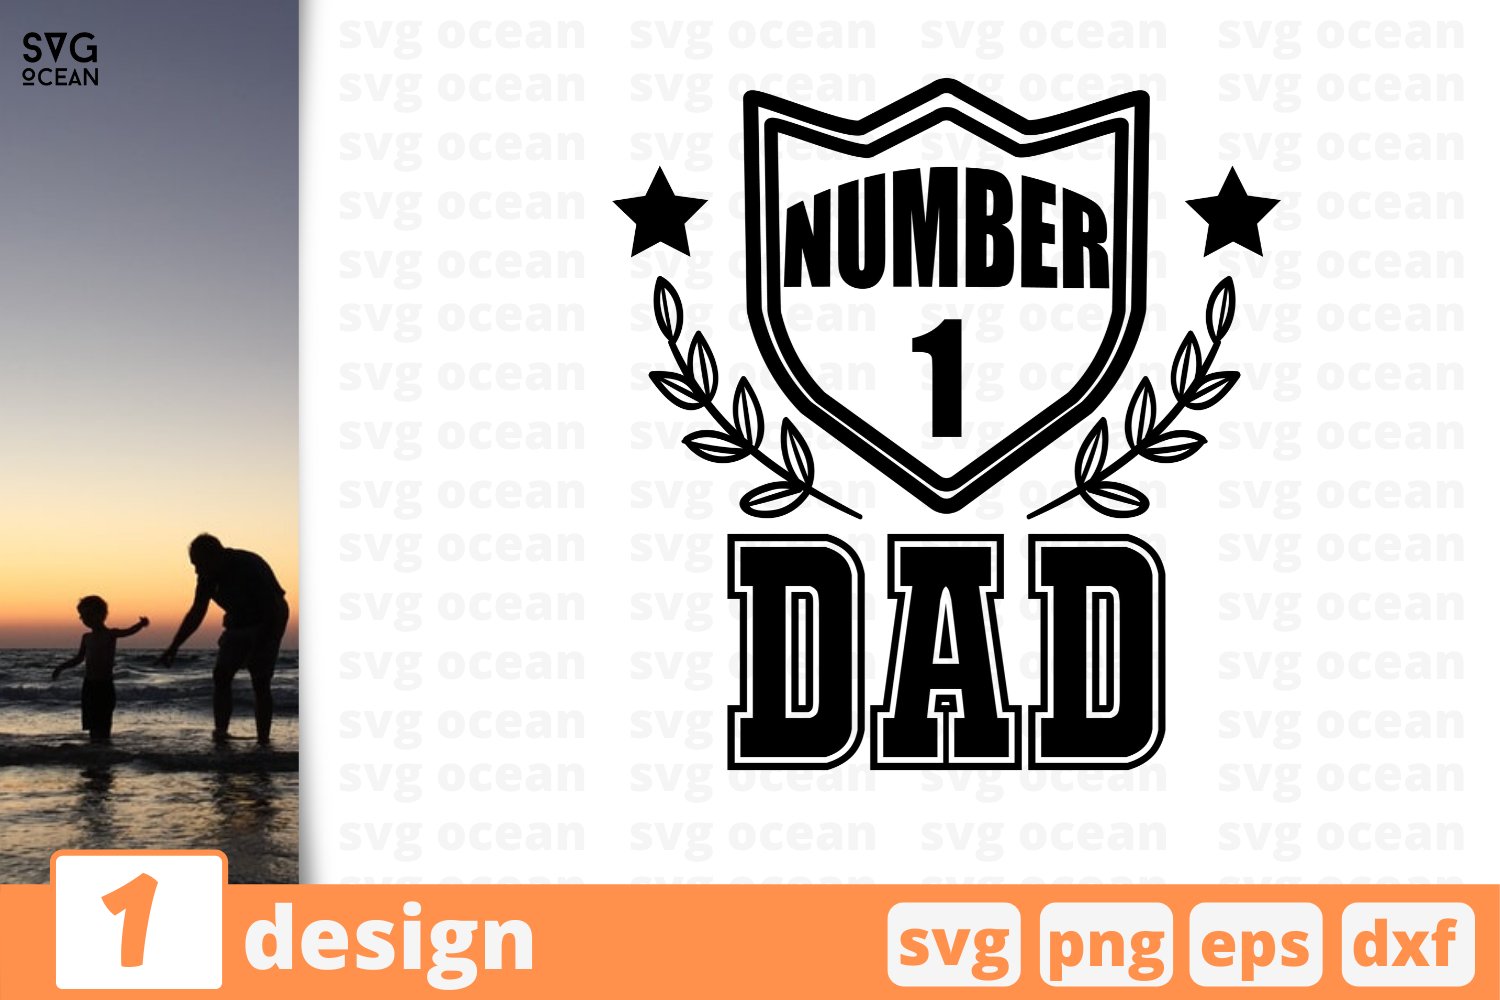 Download 1 Number 1 Dad Svg Bundle Father S Day Quotes Cricut Svg By Svgocean Thehungryjpeg Com